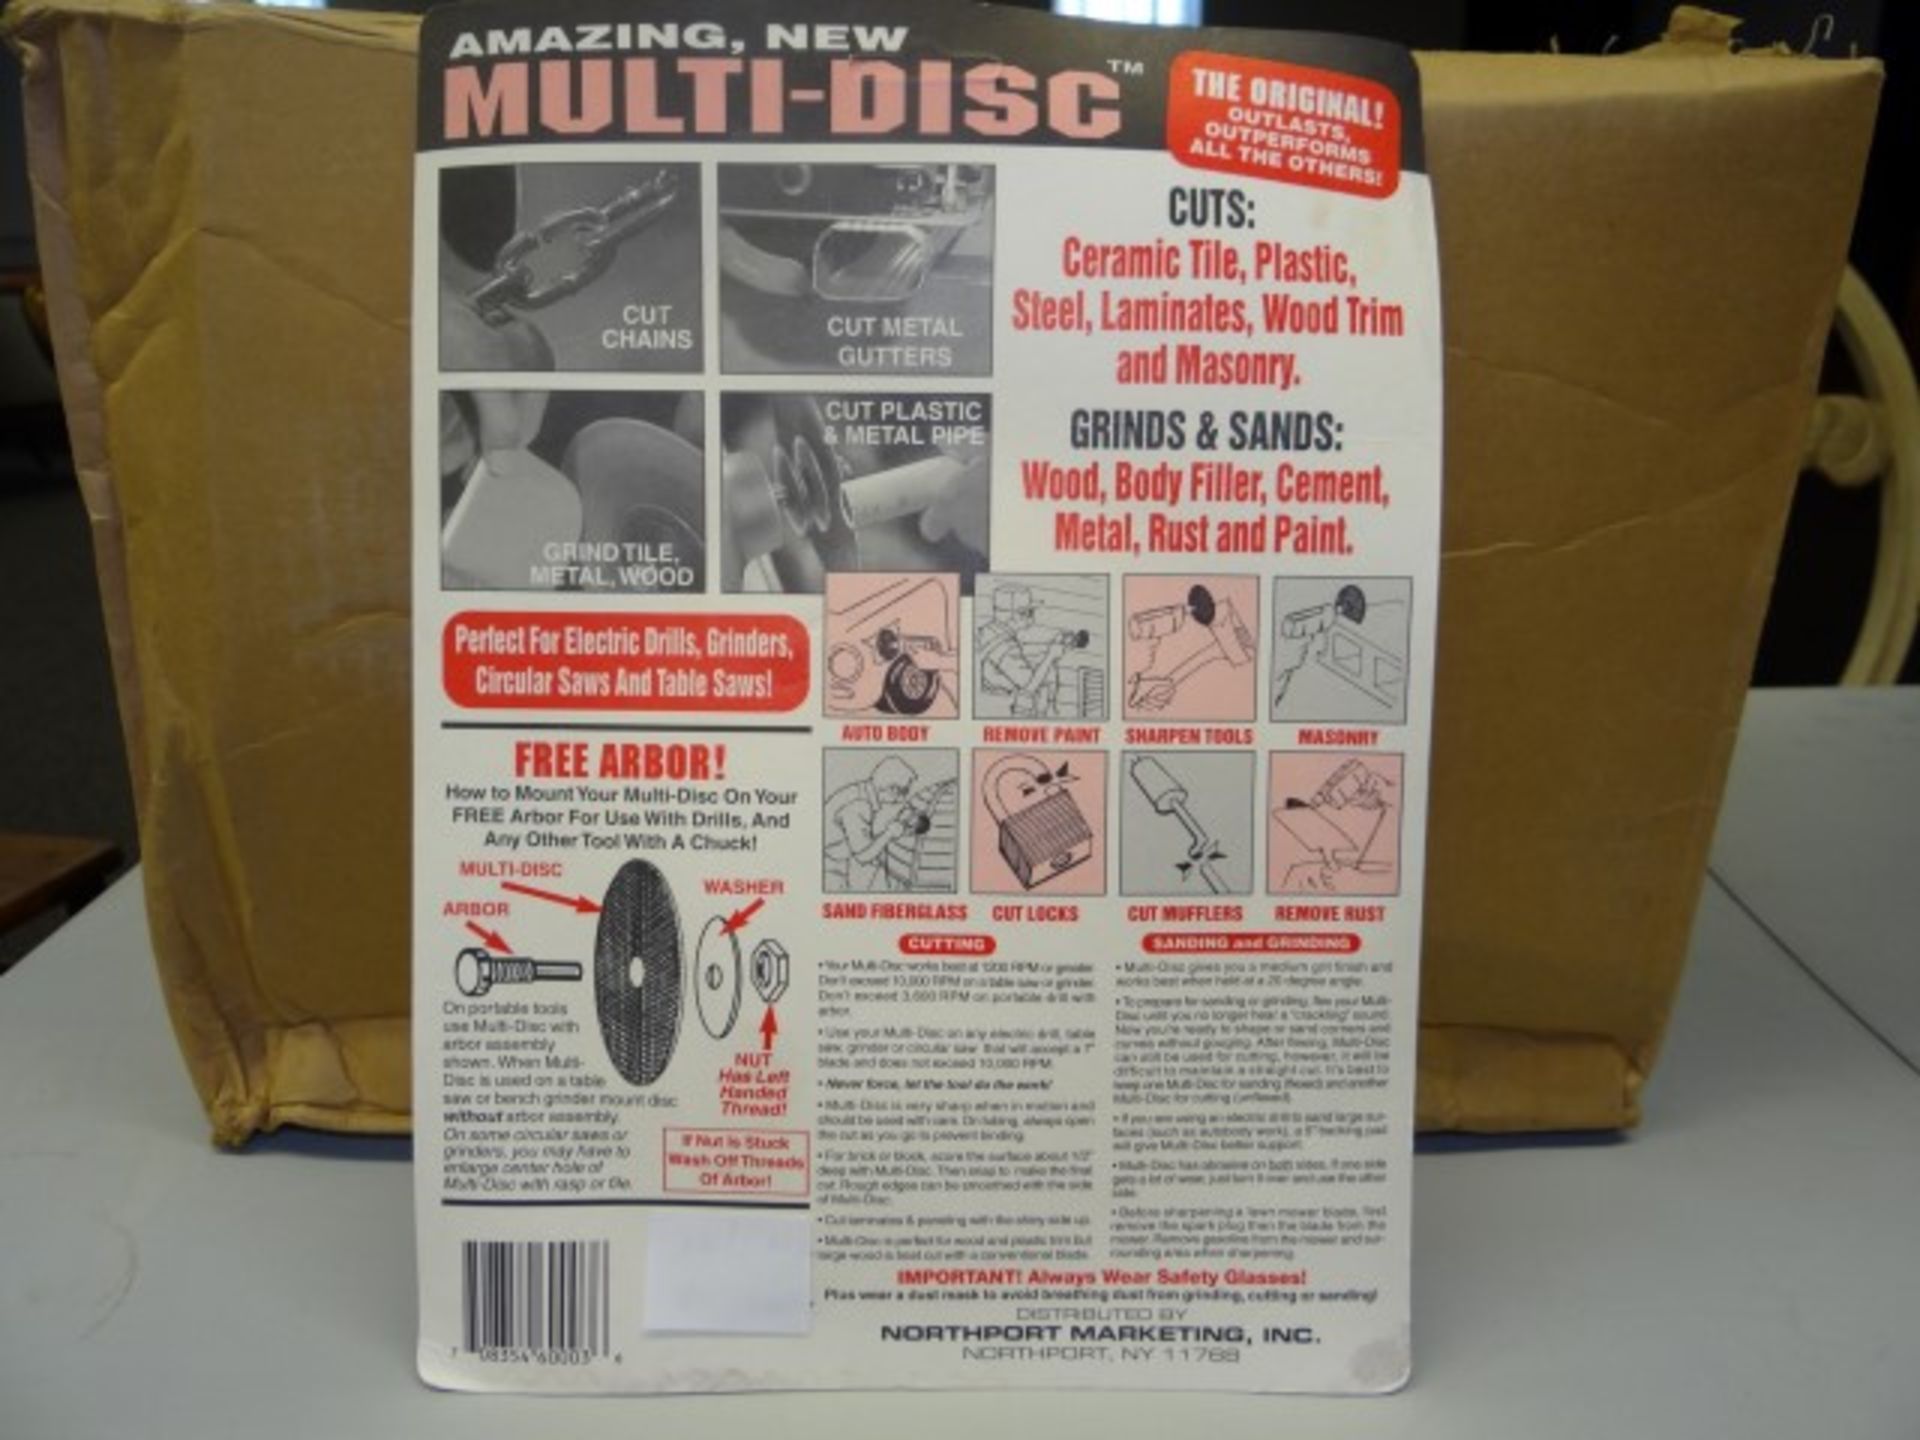 7" Aluminum Oxide Grinding and Cut Off Discs. 12 Blister Packs/Case with 2 Disks Per Pack with Arbor - Bild 2 aus 3